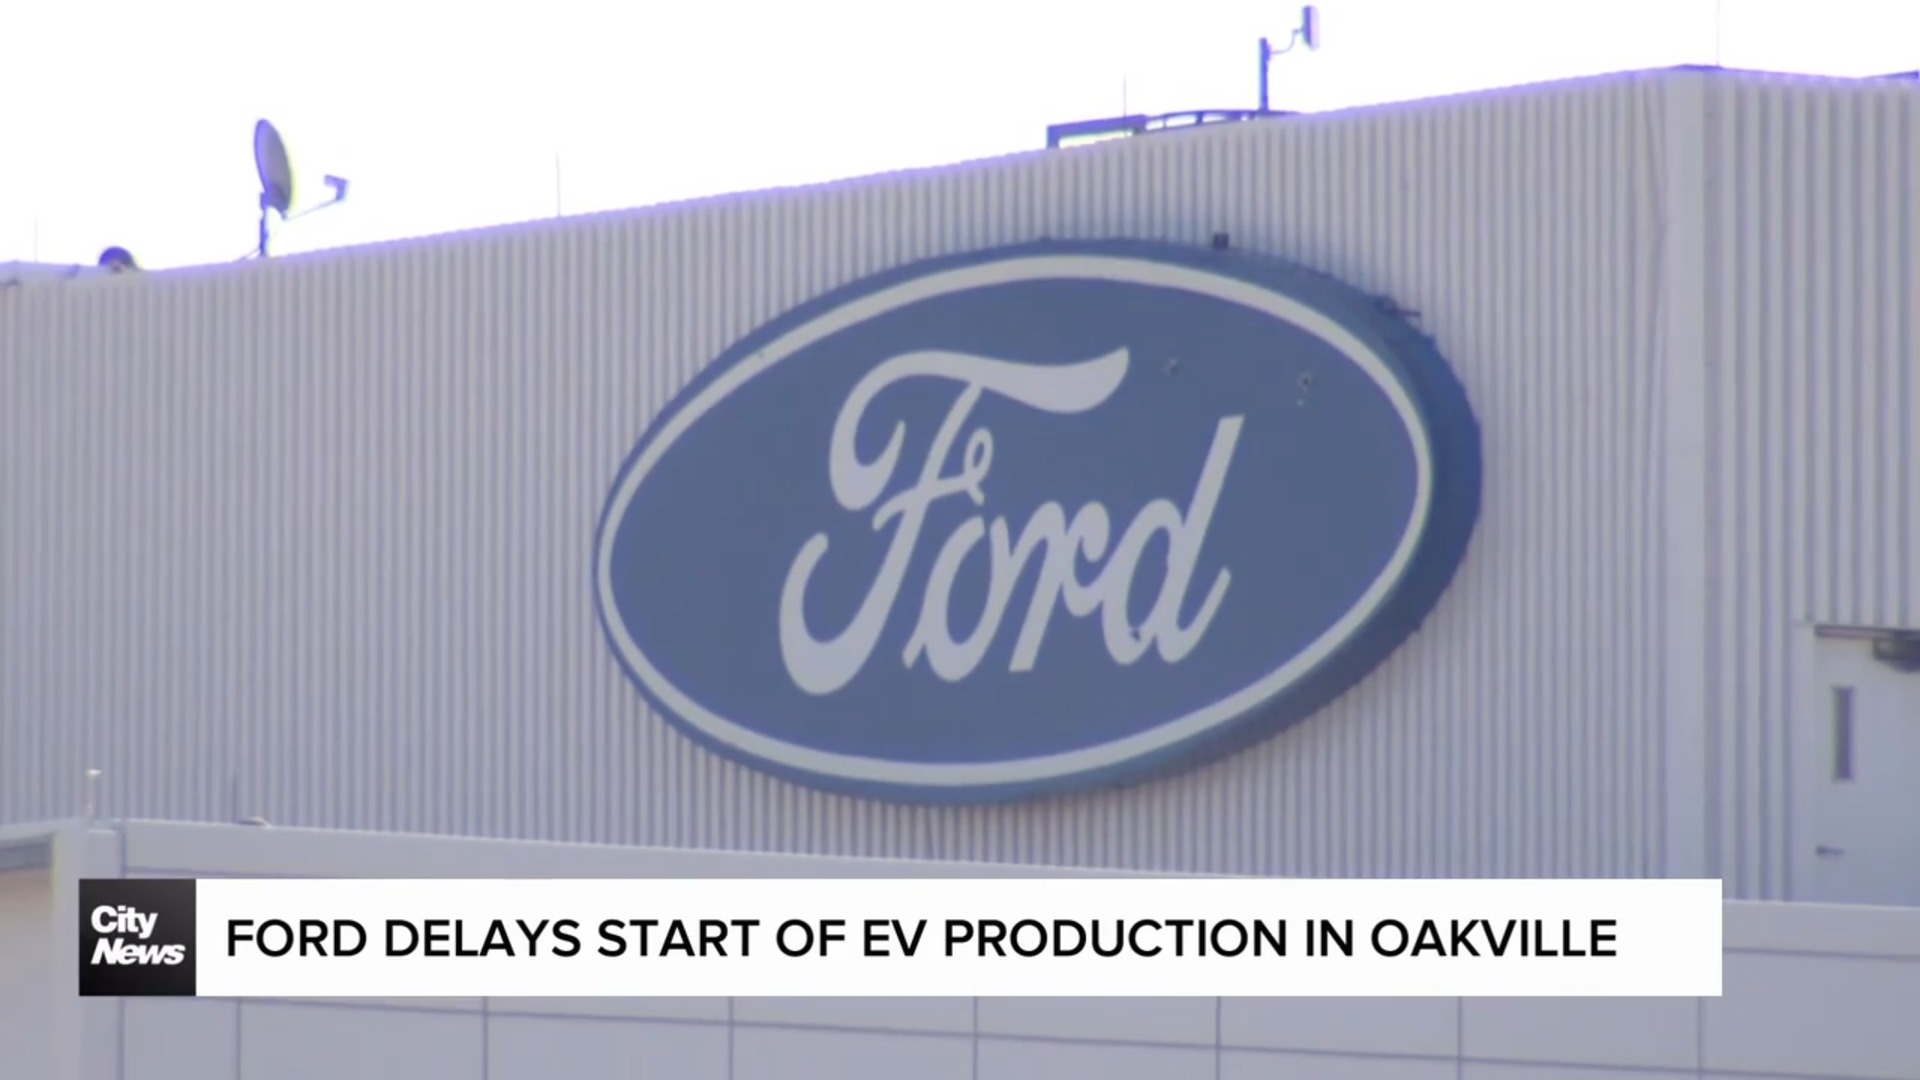 Business News: Ford delaying EV production in Oakville